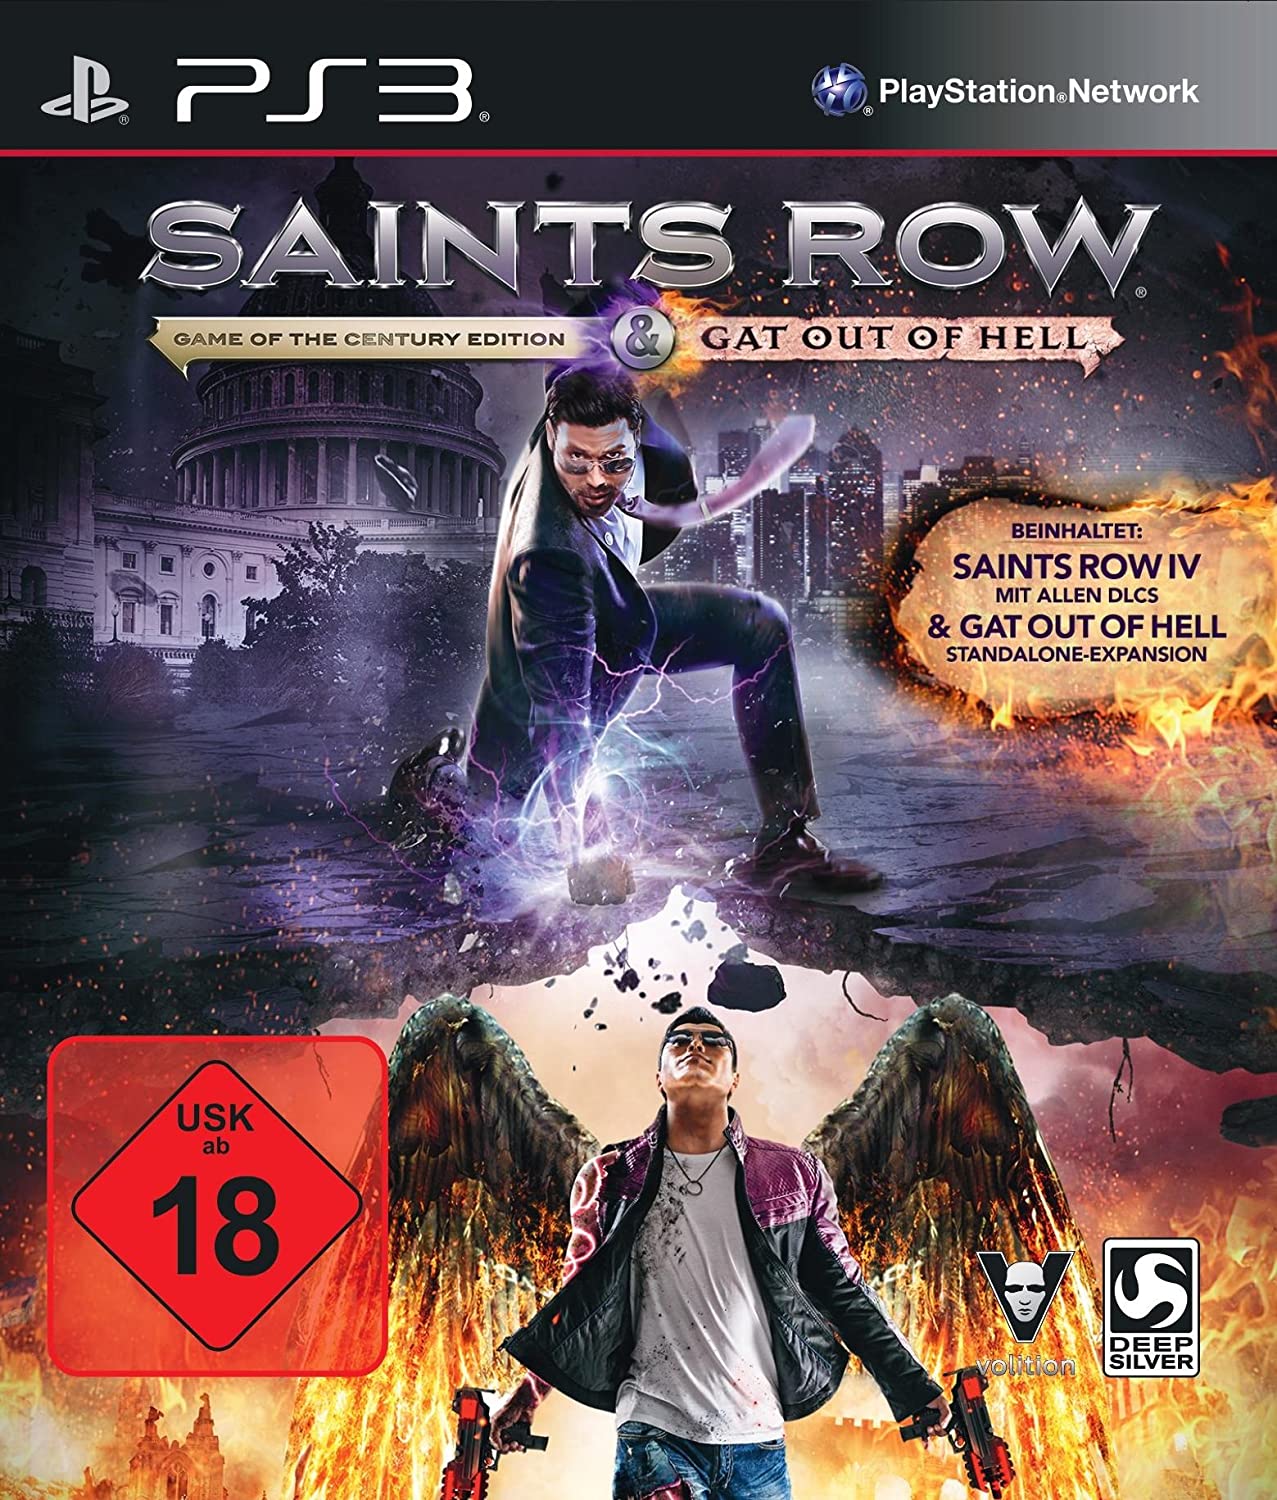 Saints Row Game of The Century Edition and Gat Out of Hell